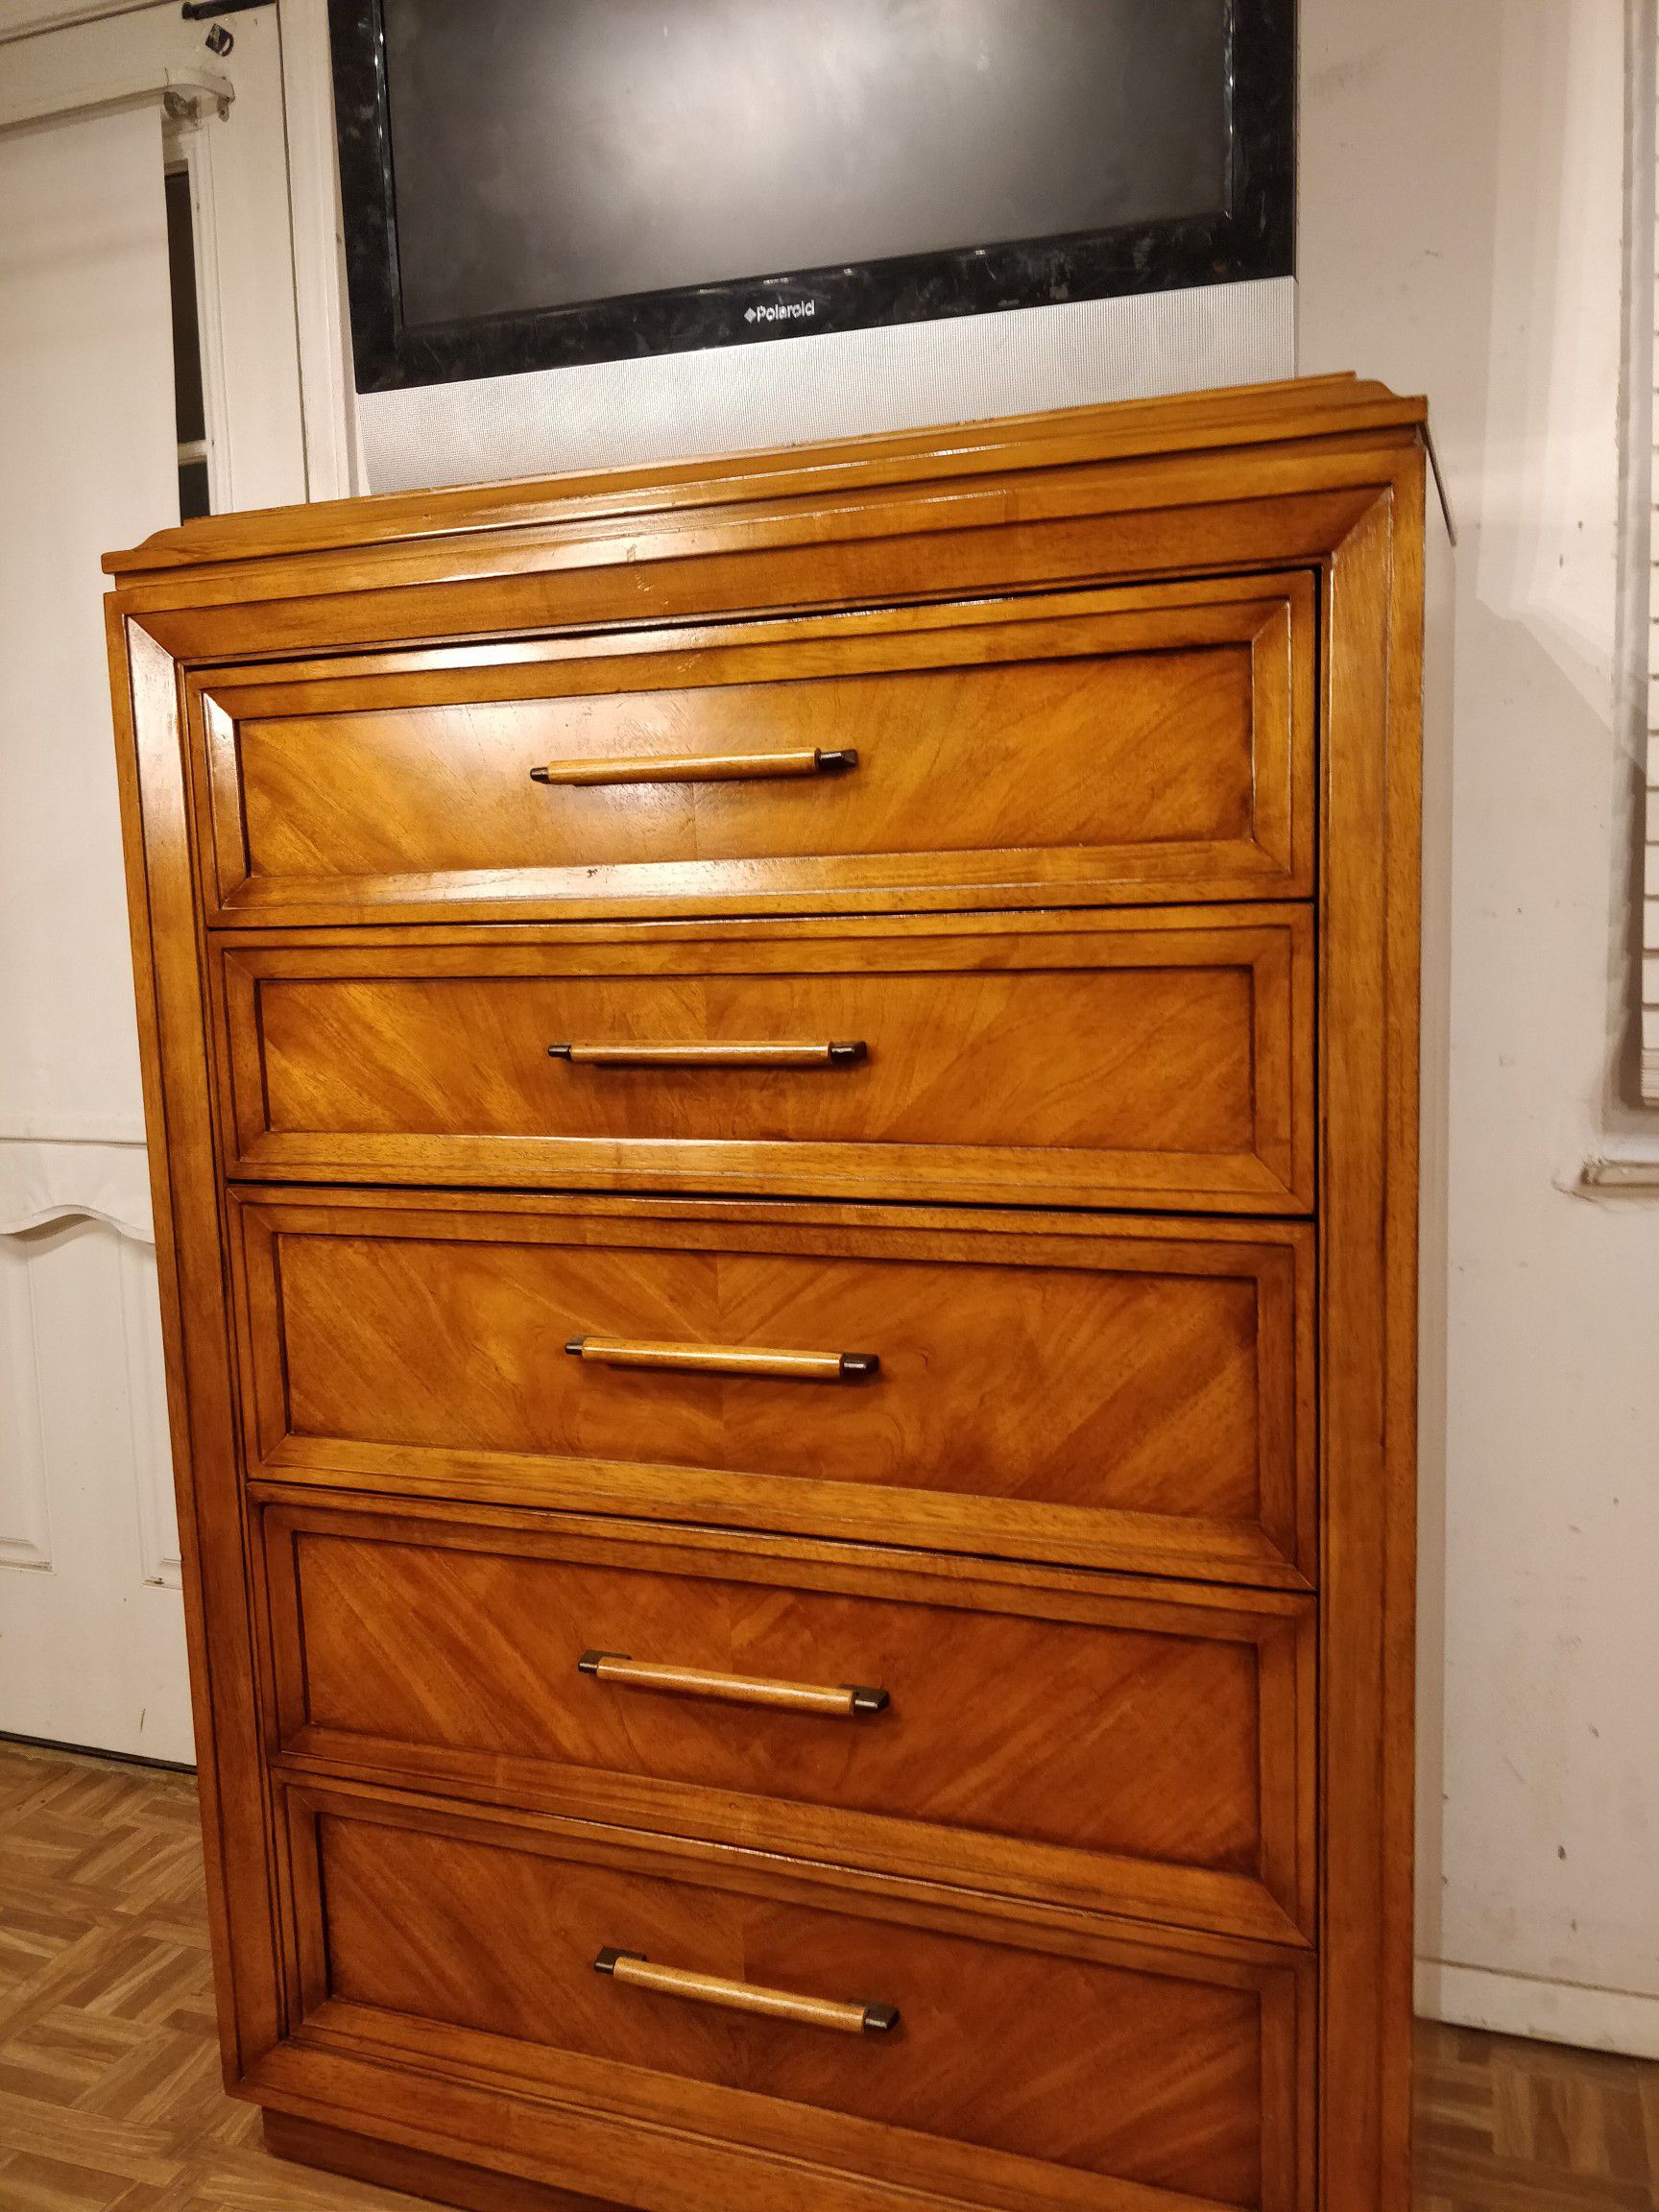 Big Wooden chest dresser with big drawers in great condition all drawers working well dovetail drawers driveway pickup. L38"*W18"*H54"